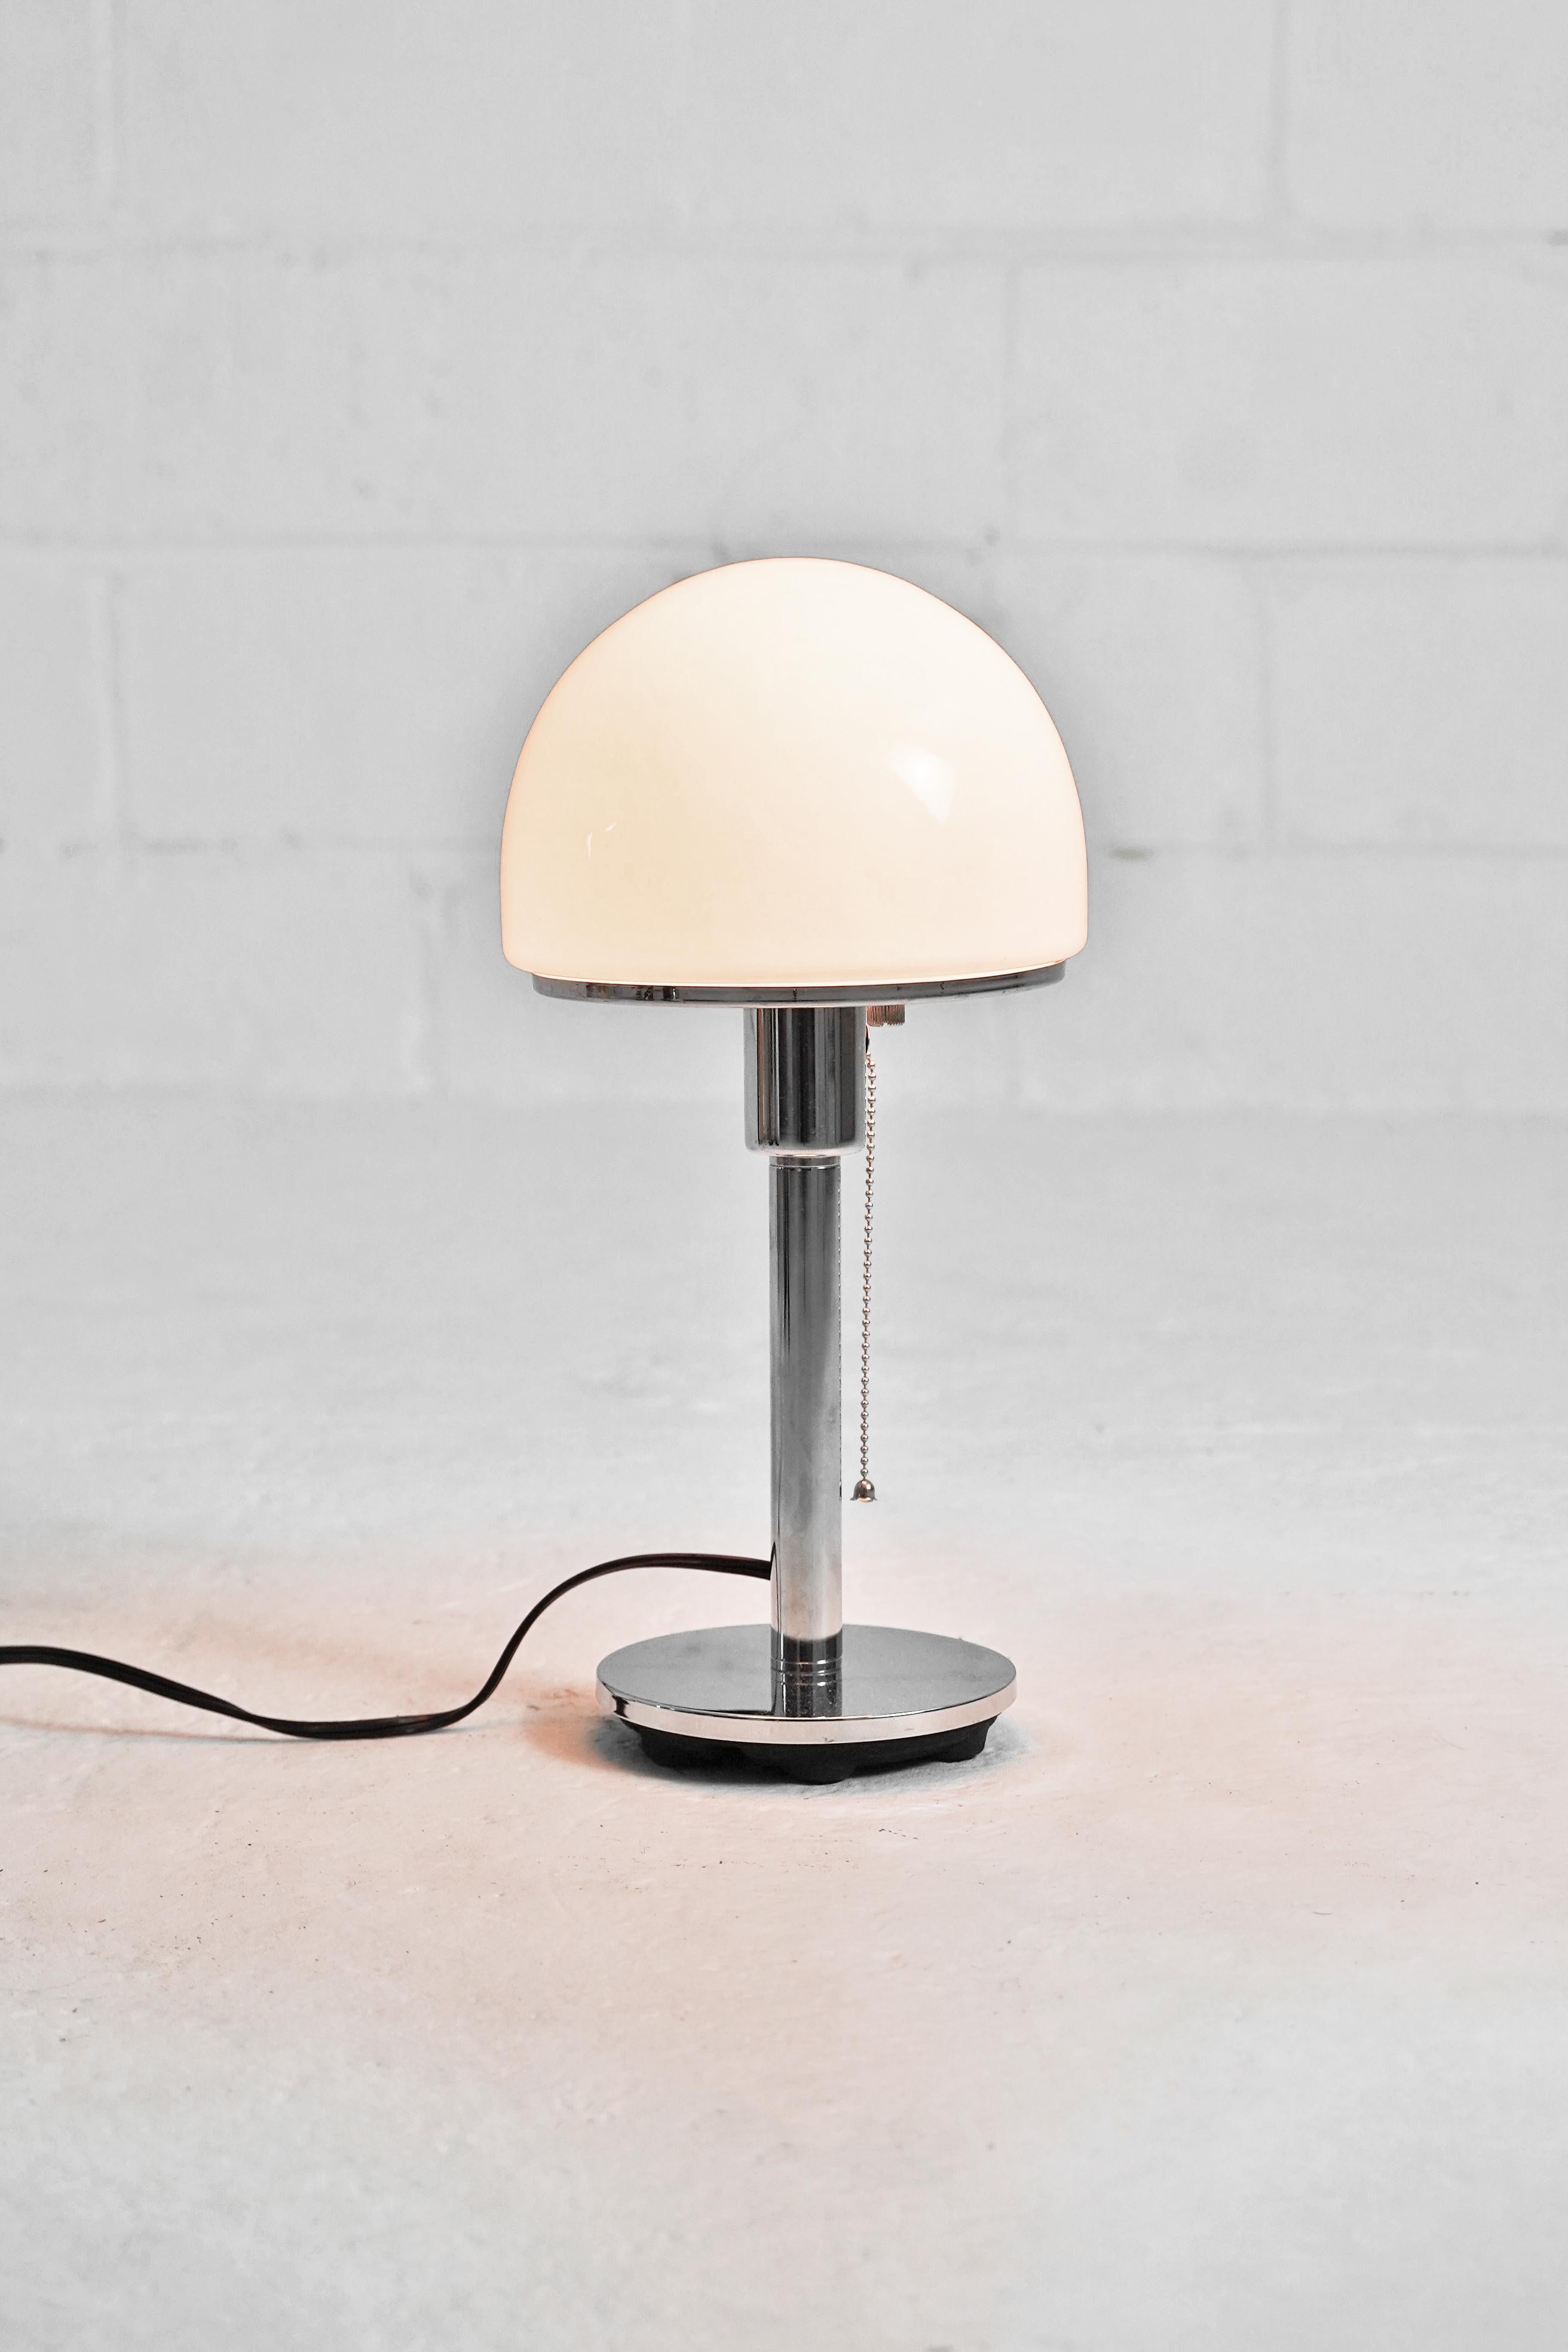 Stunning table lamp in the style of WA 23 SW by Wilhelm Wagenfeld, often named the 